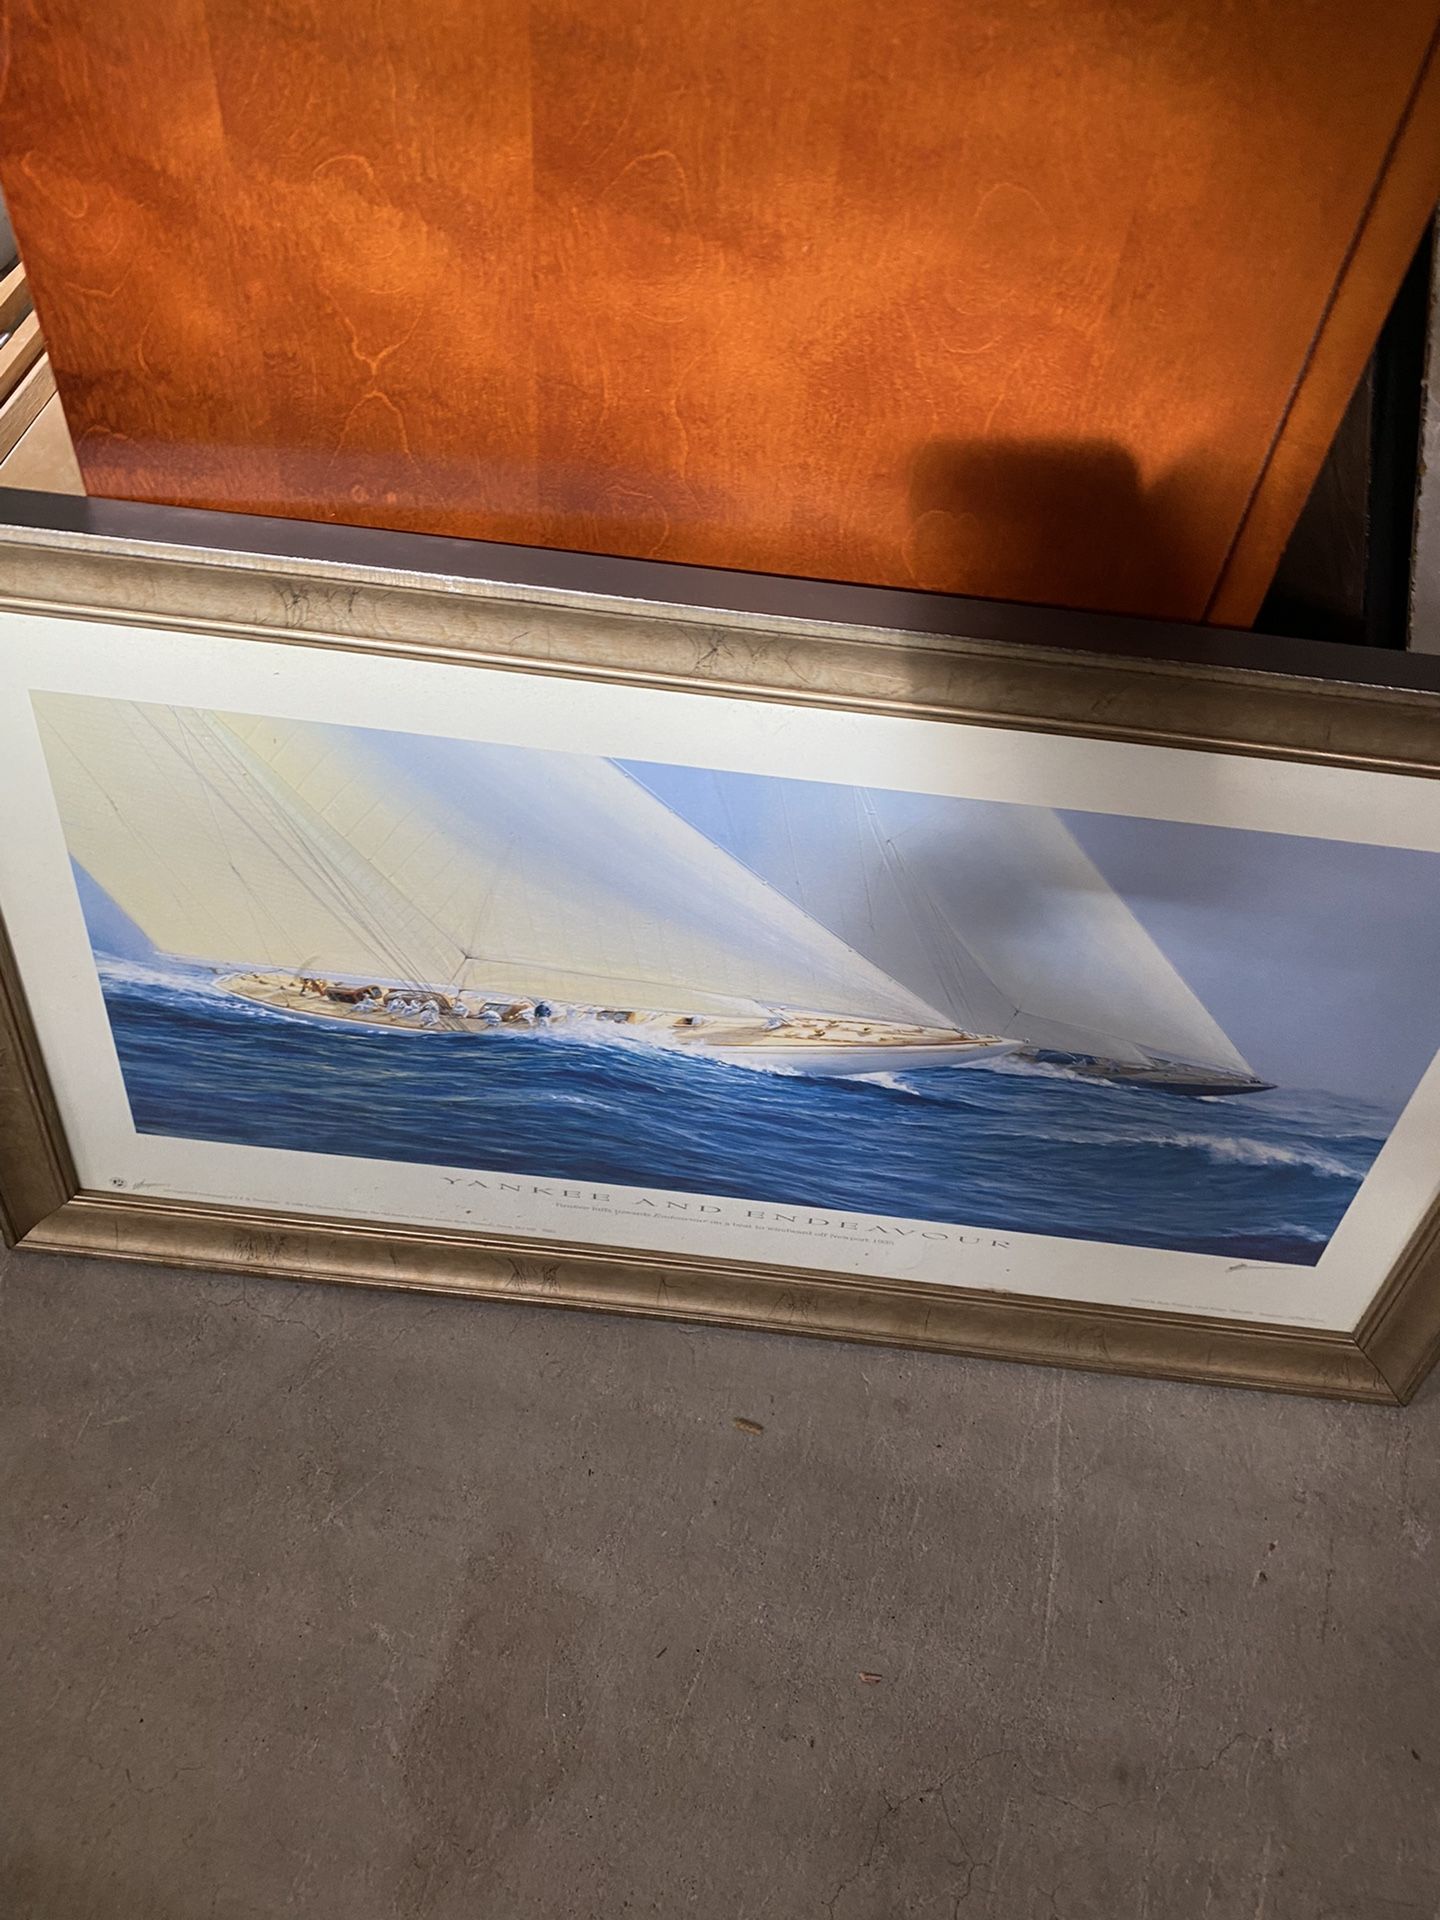 Photo Picture Of Sailing Boat In The Ocean Size 28x16 Inches